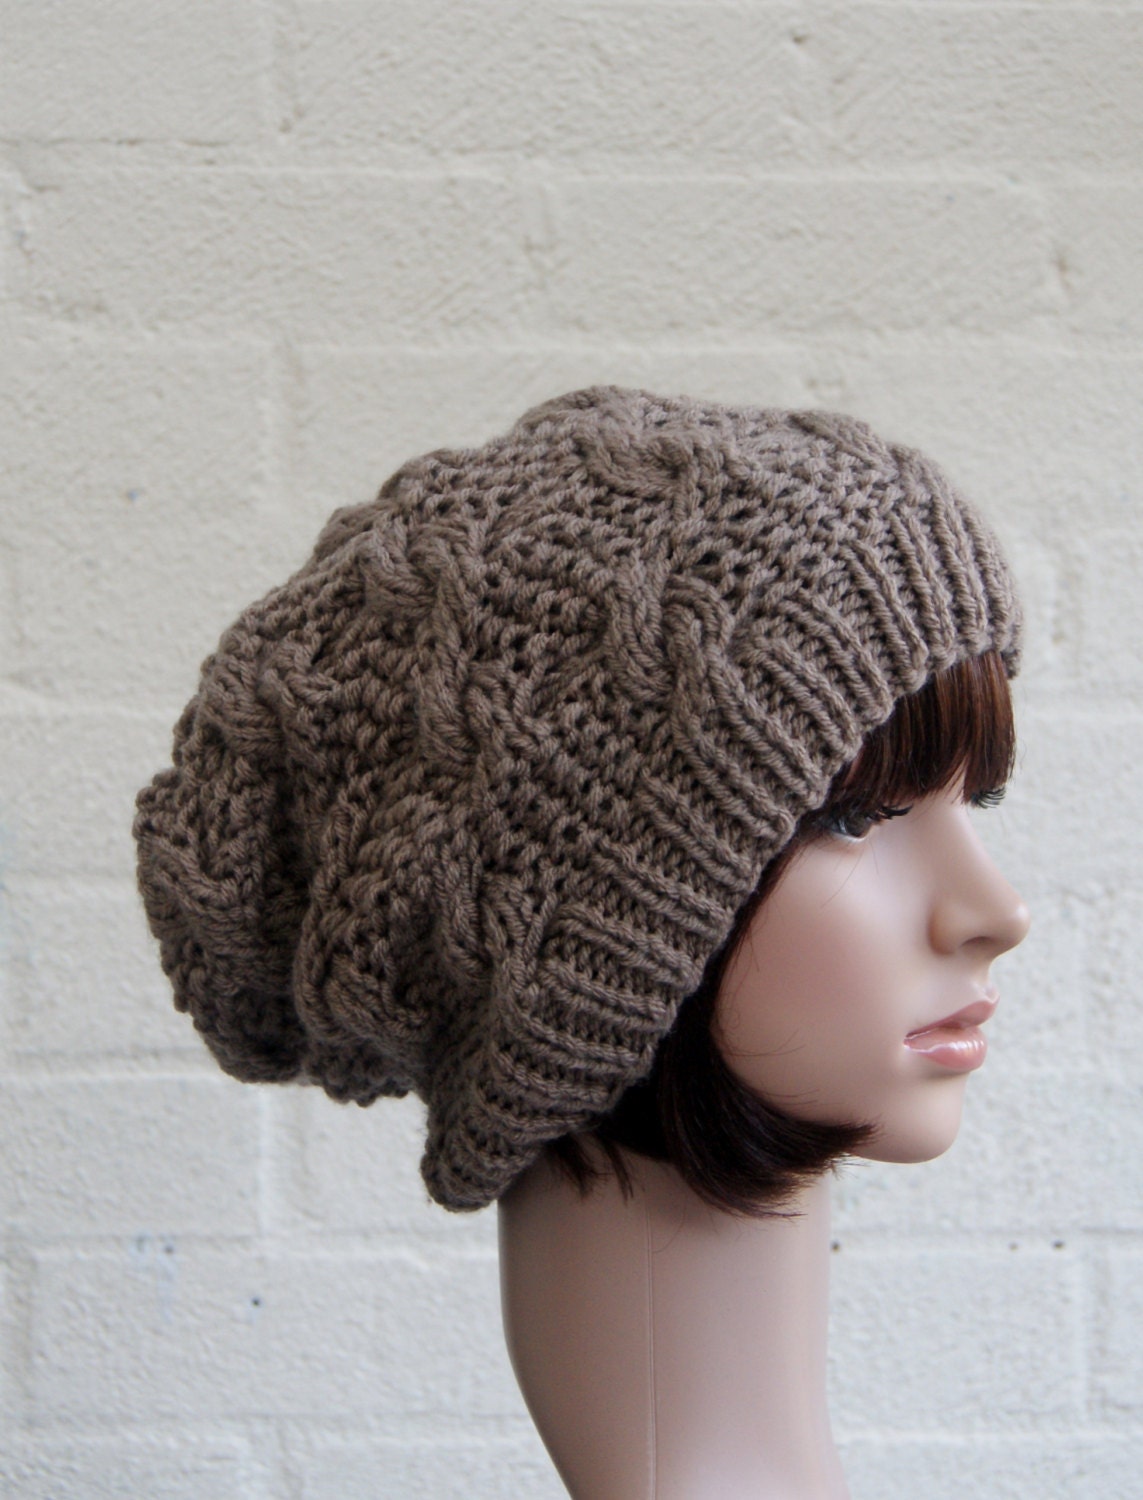 Chunky knit cable beanie in Walnut/Slouchy Beanie/Knitted